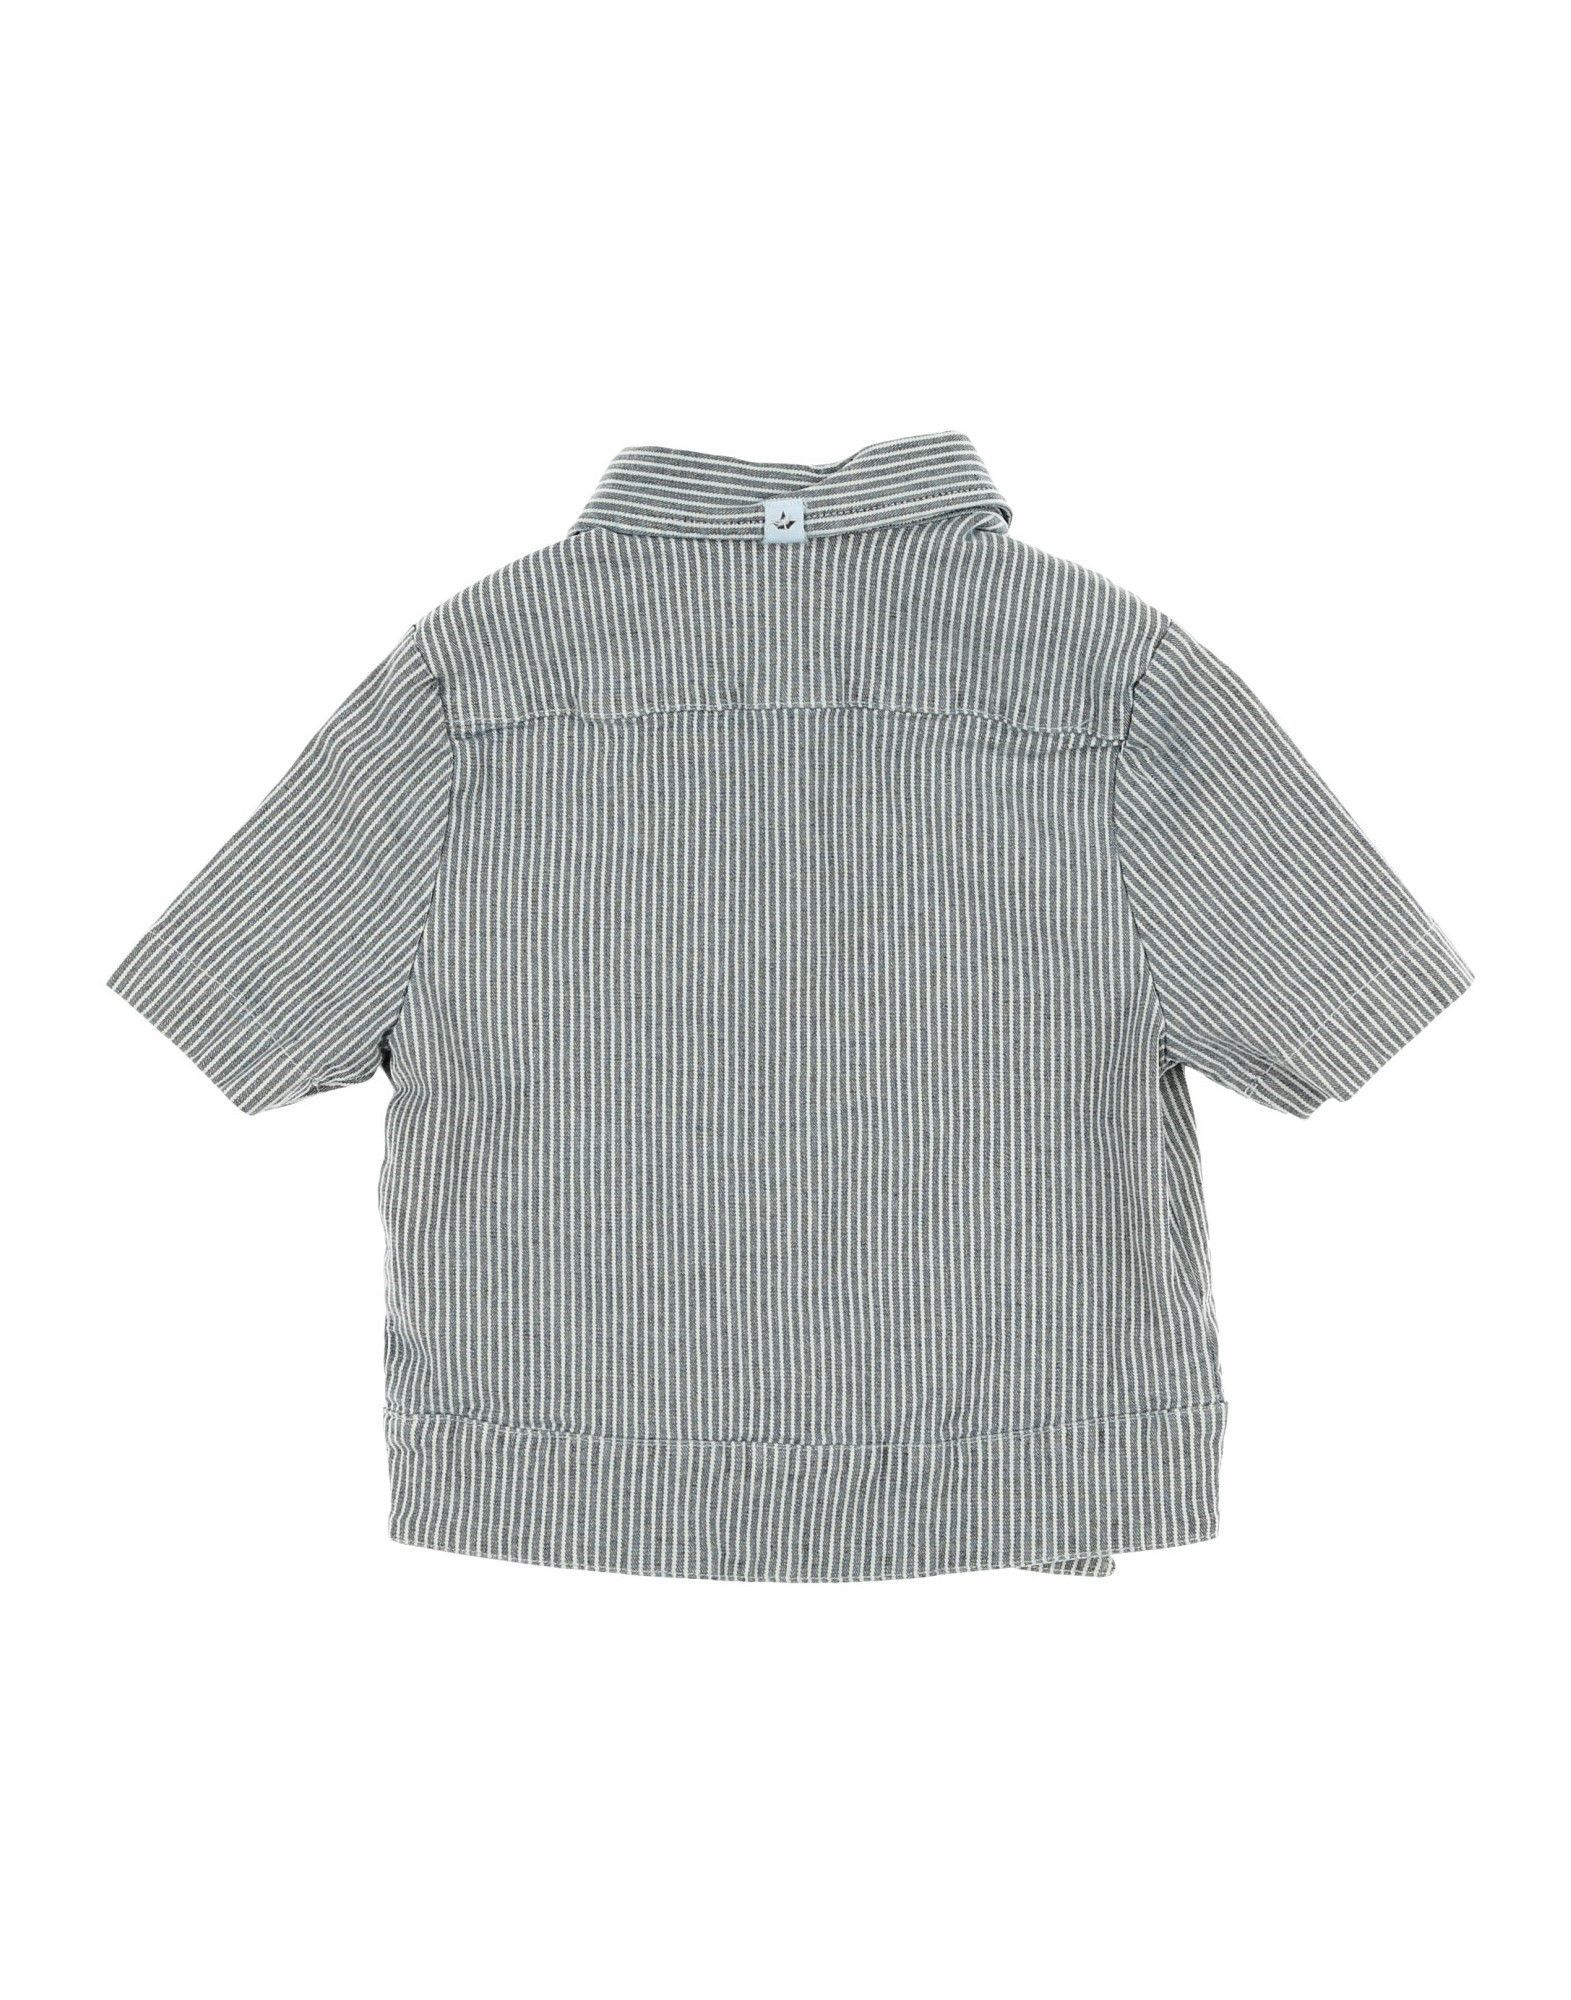 plain weave, no appliqu�s, stripes, front closure, short sleeves, classic neckline, single chest pocket, stretch, wash at 30� c, do not dry clean, iron at 110� c max, do not bleach, do not tumble dry, button closing